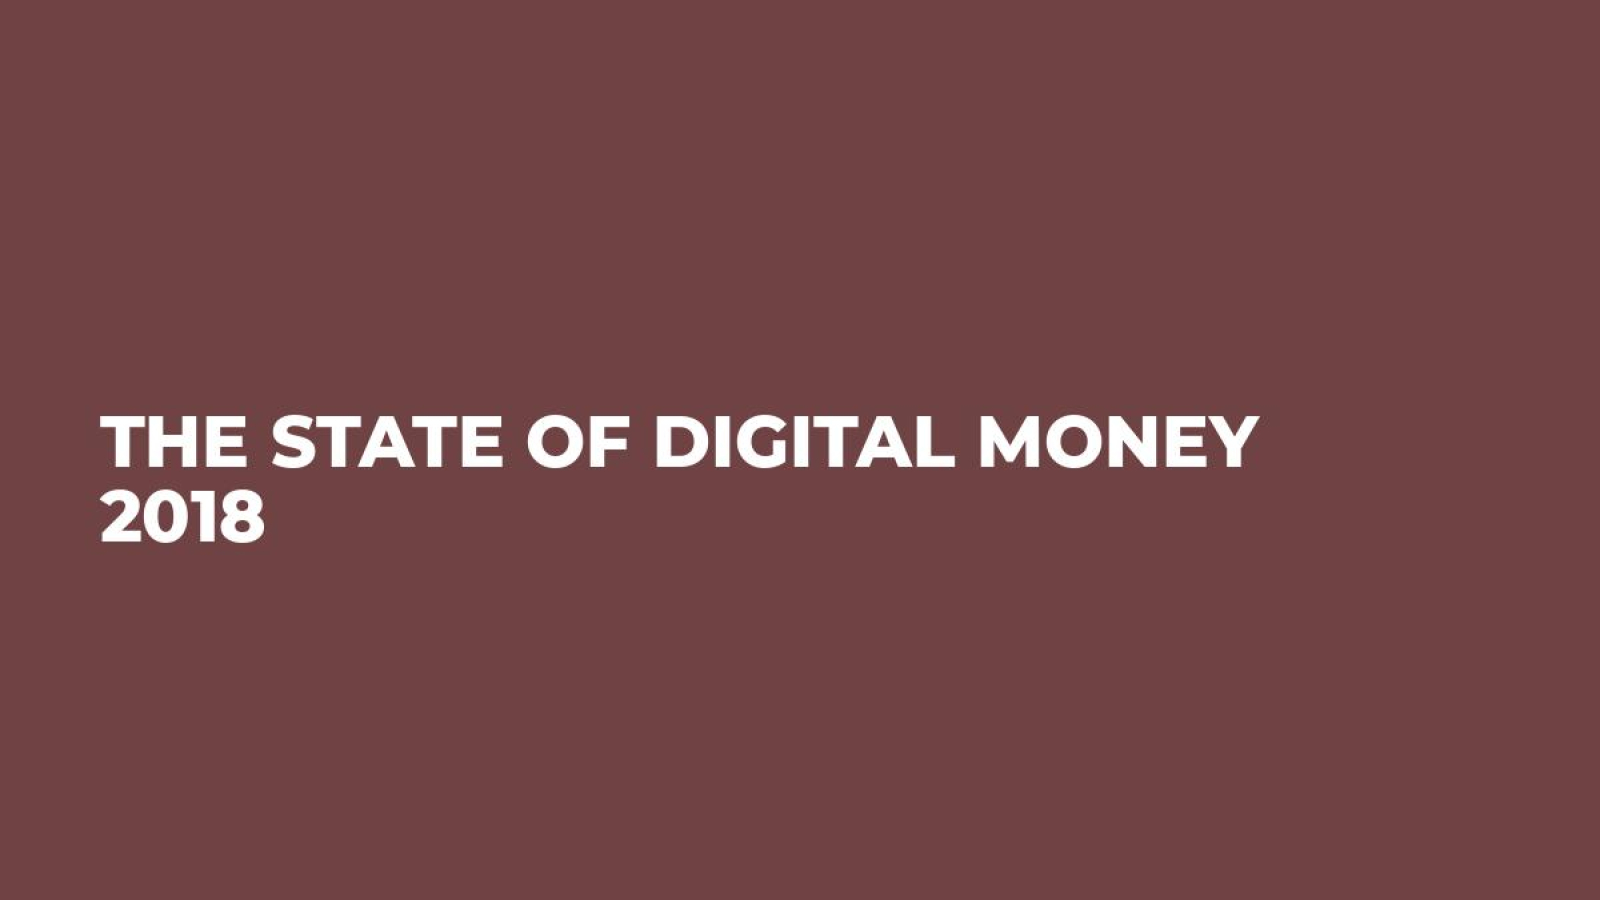 The State of Digital Money 2018